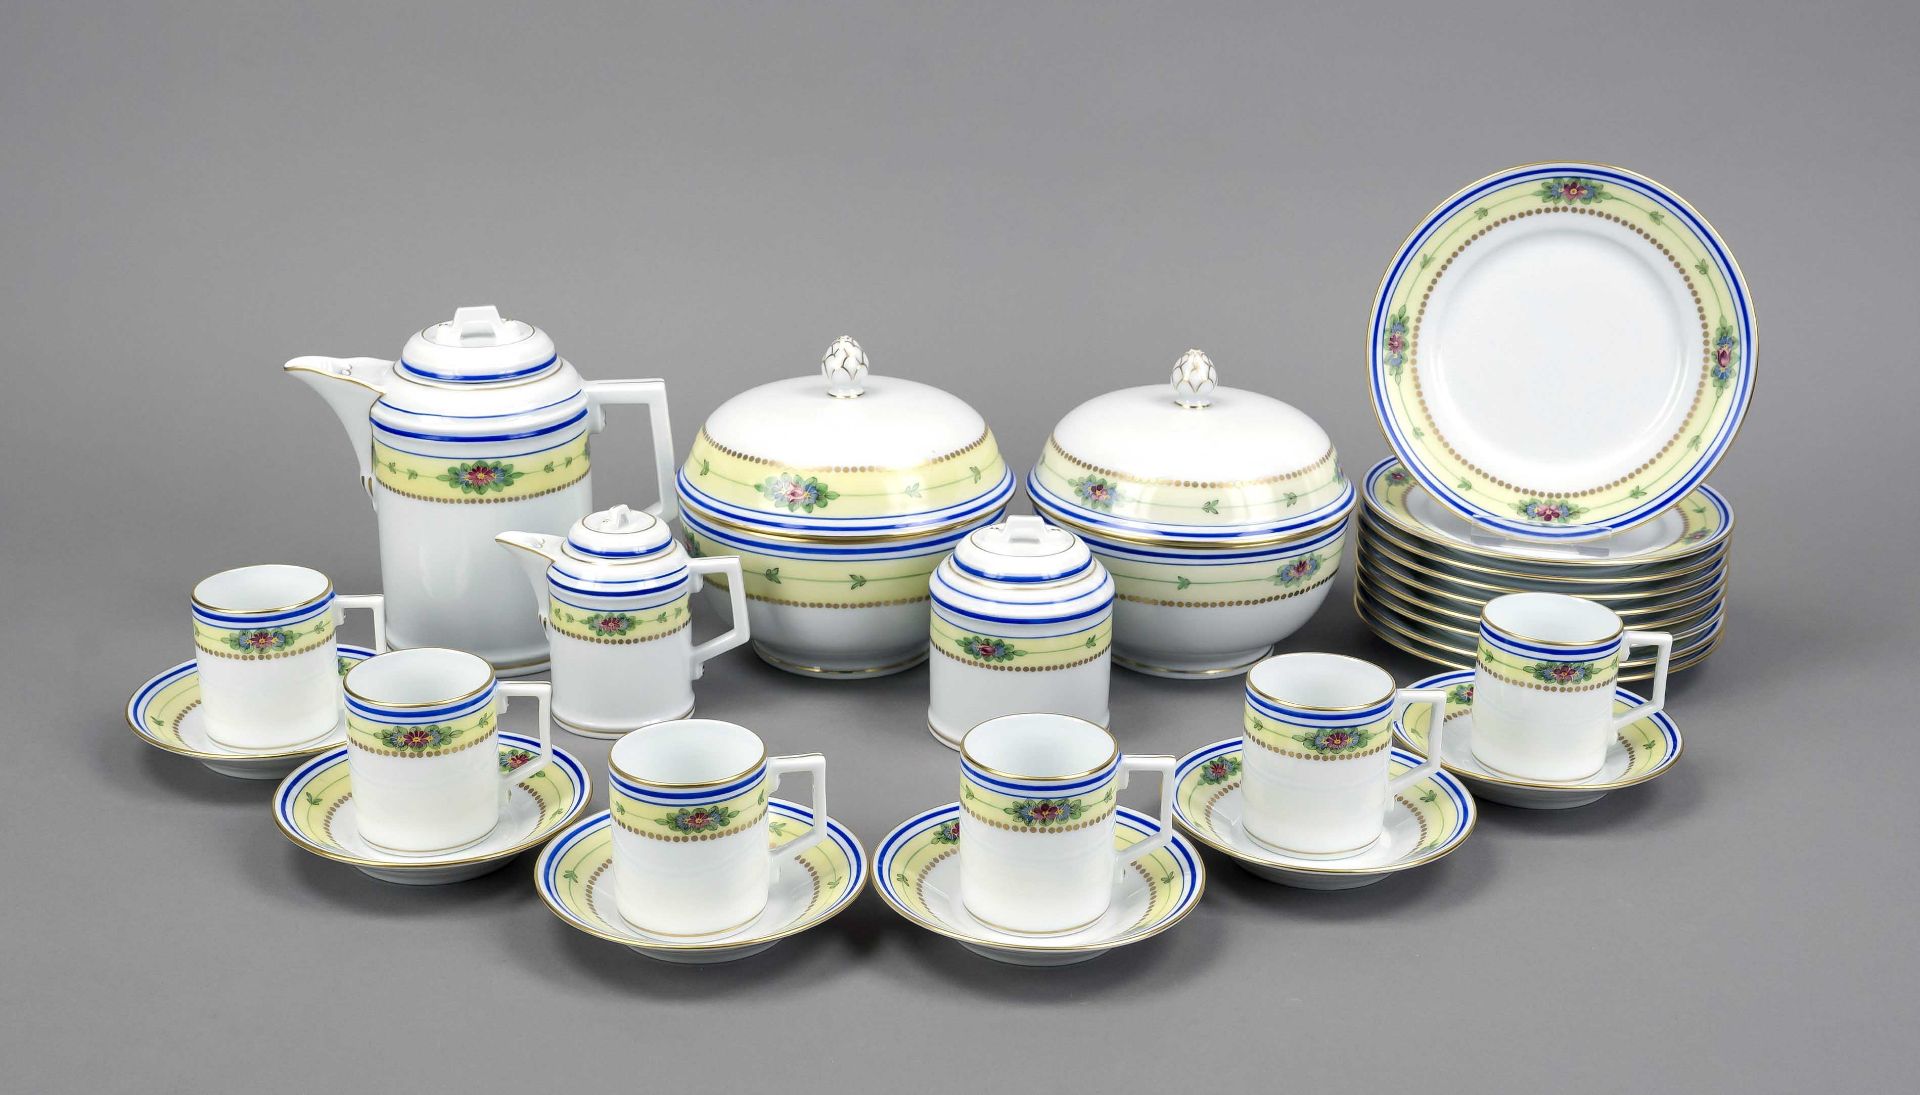 Mocha service for 20 persons, 65-piece, Höchst, 20th century, Empire-style tableware with